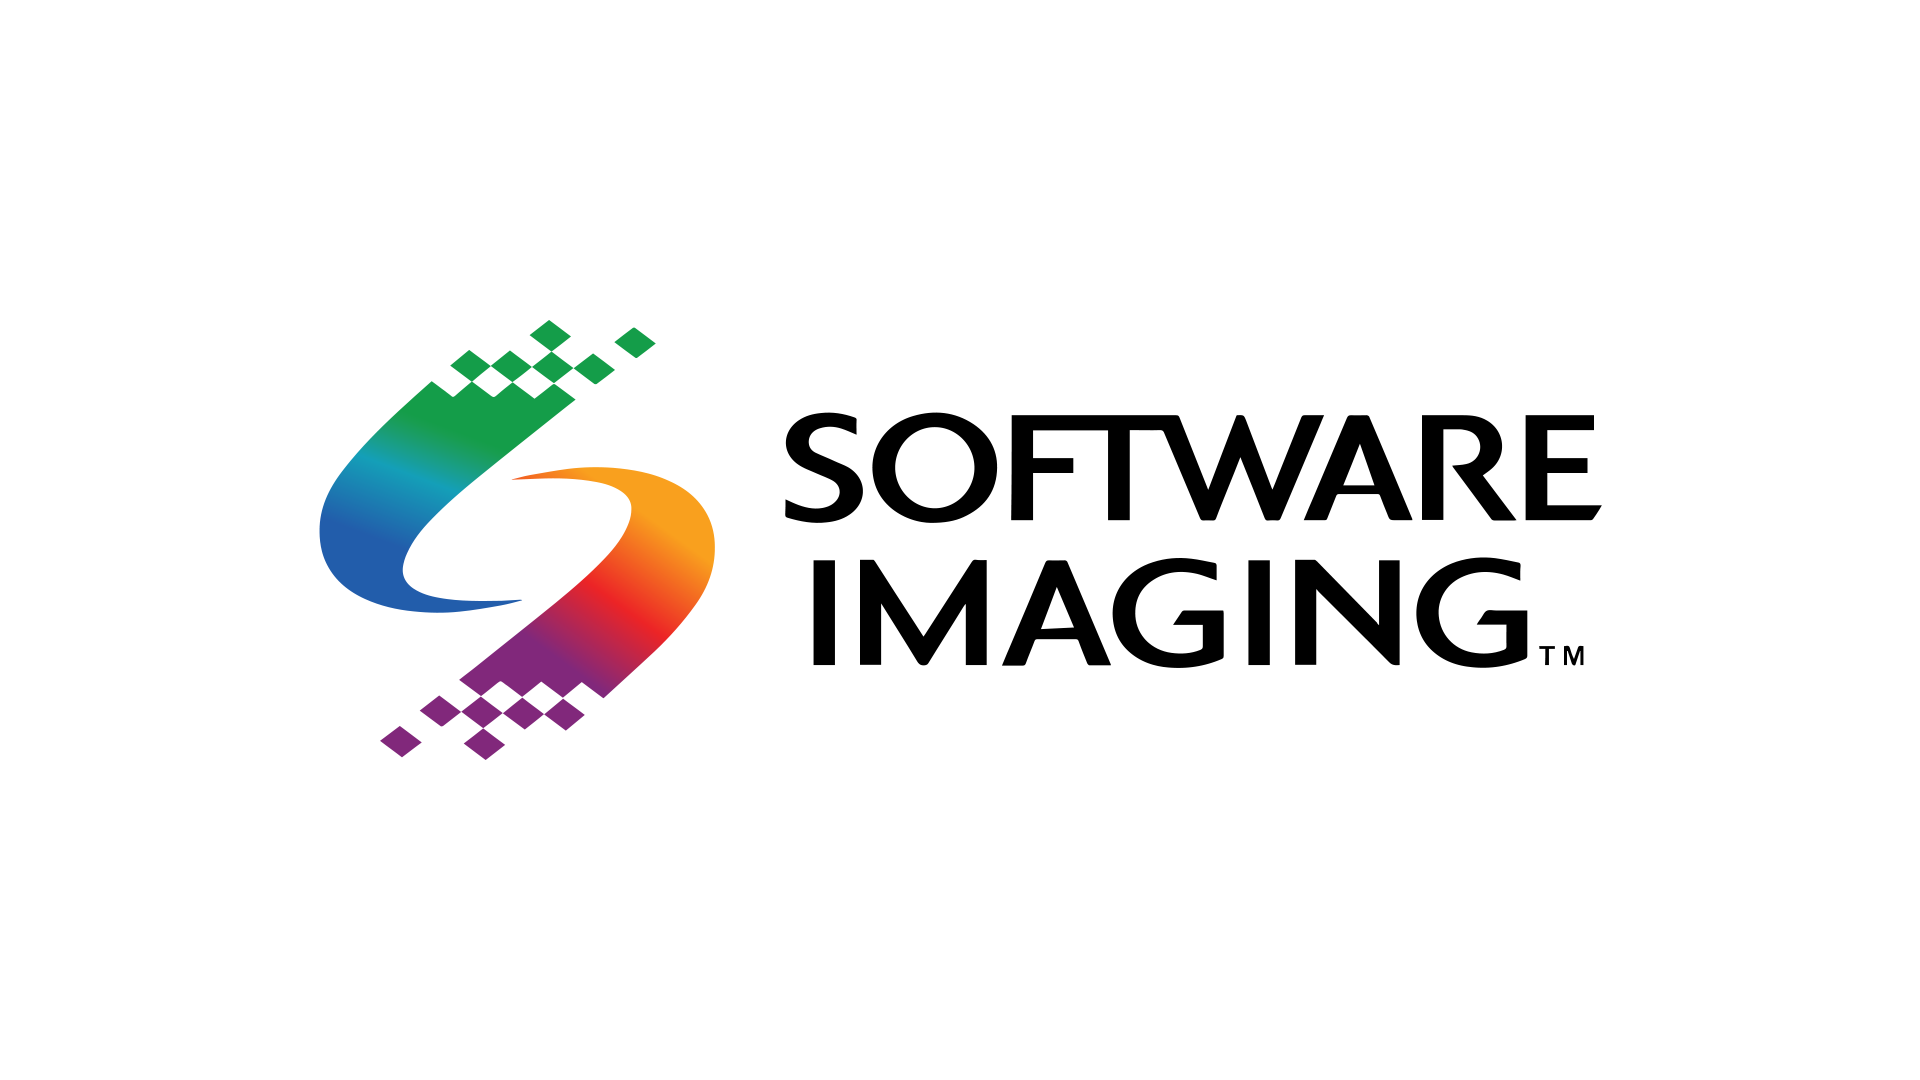 Software Imaging Limited